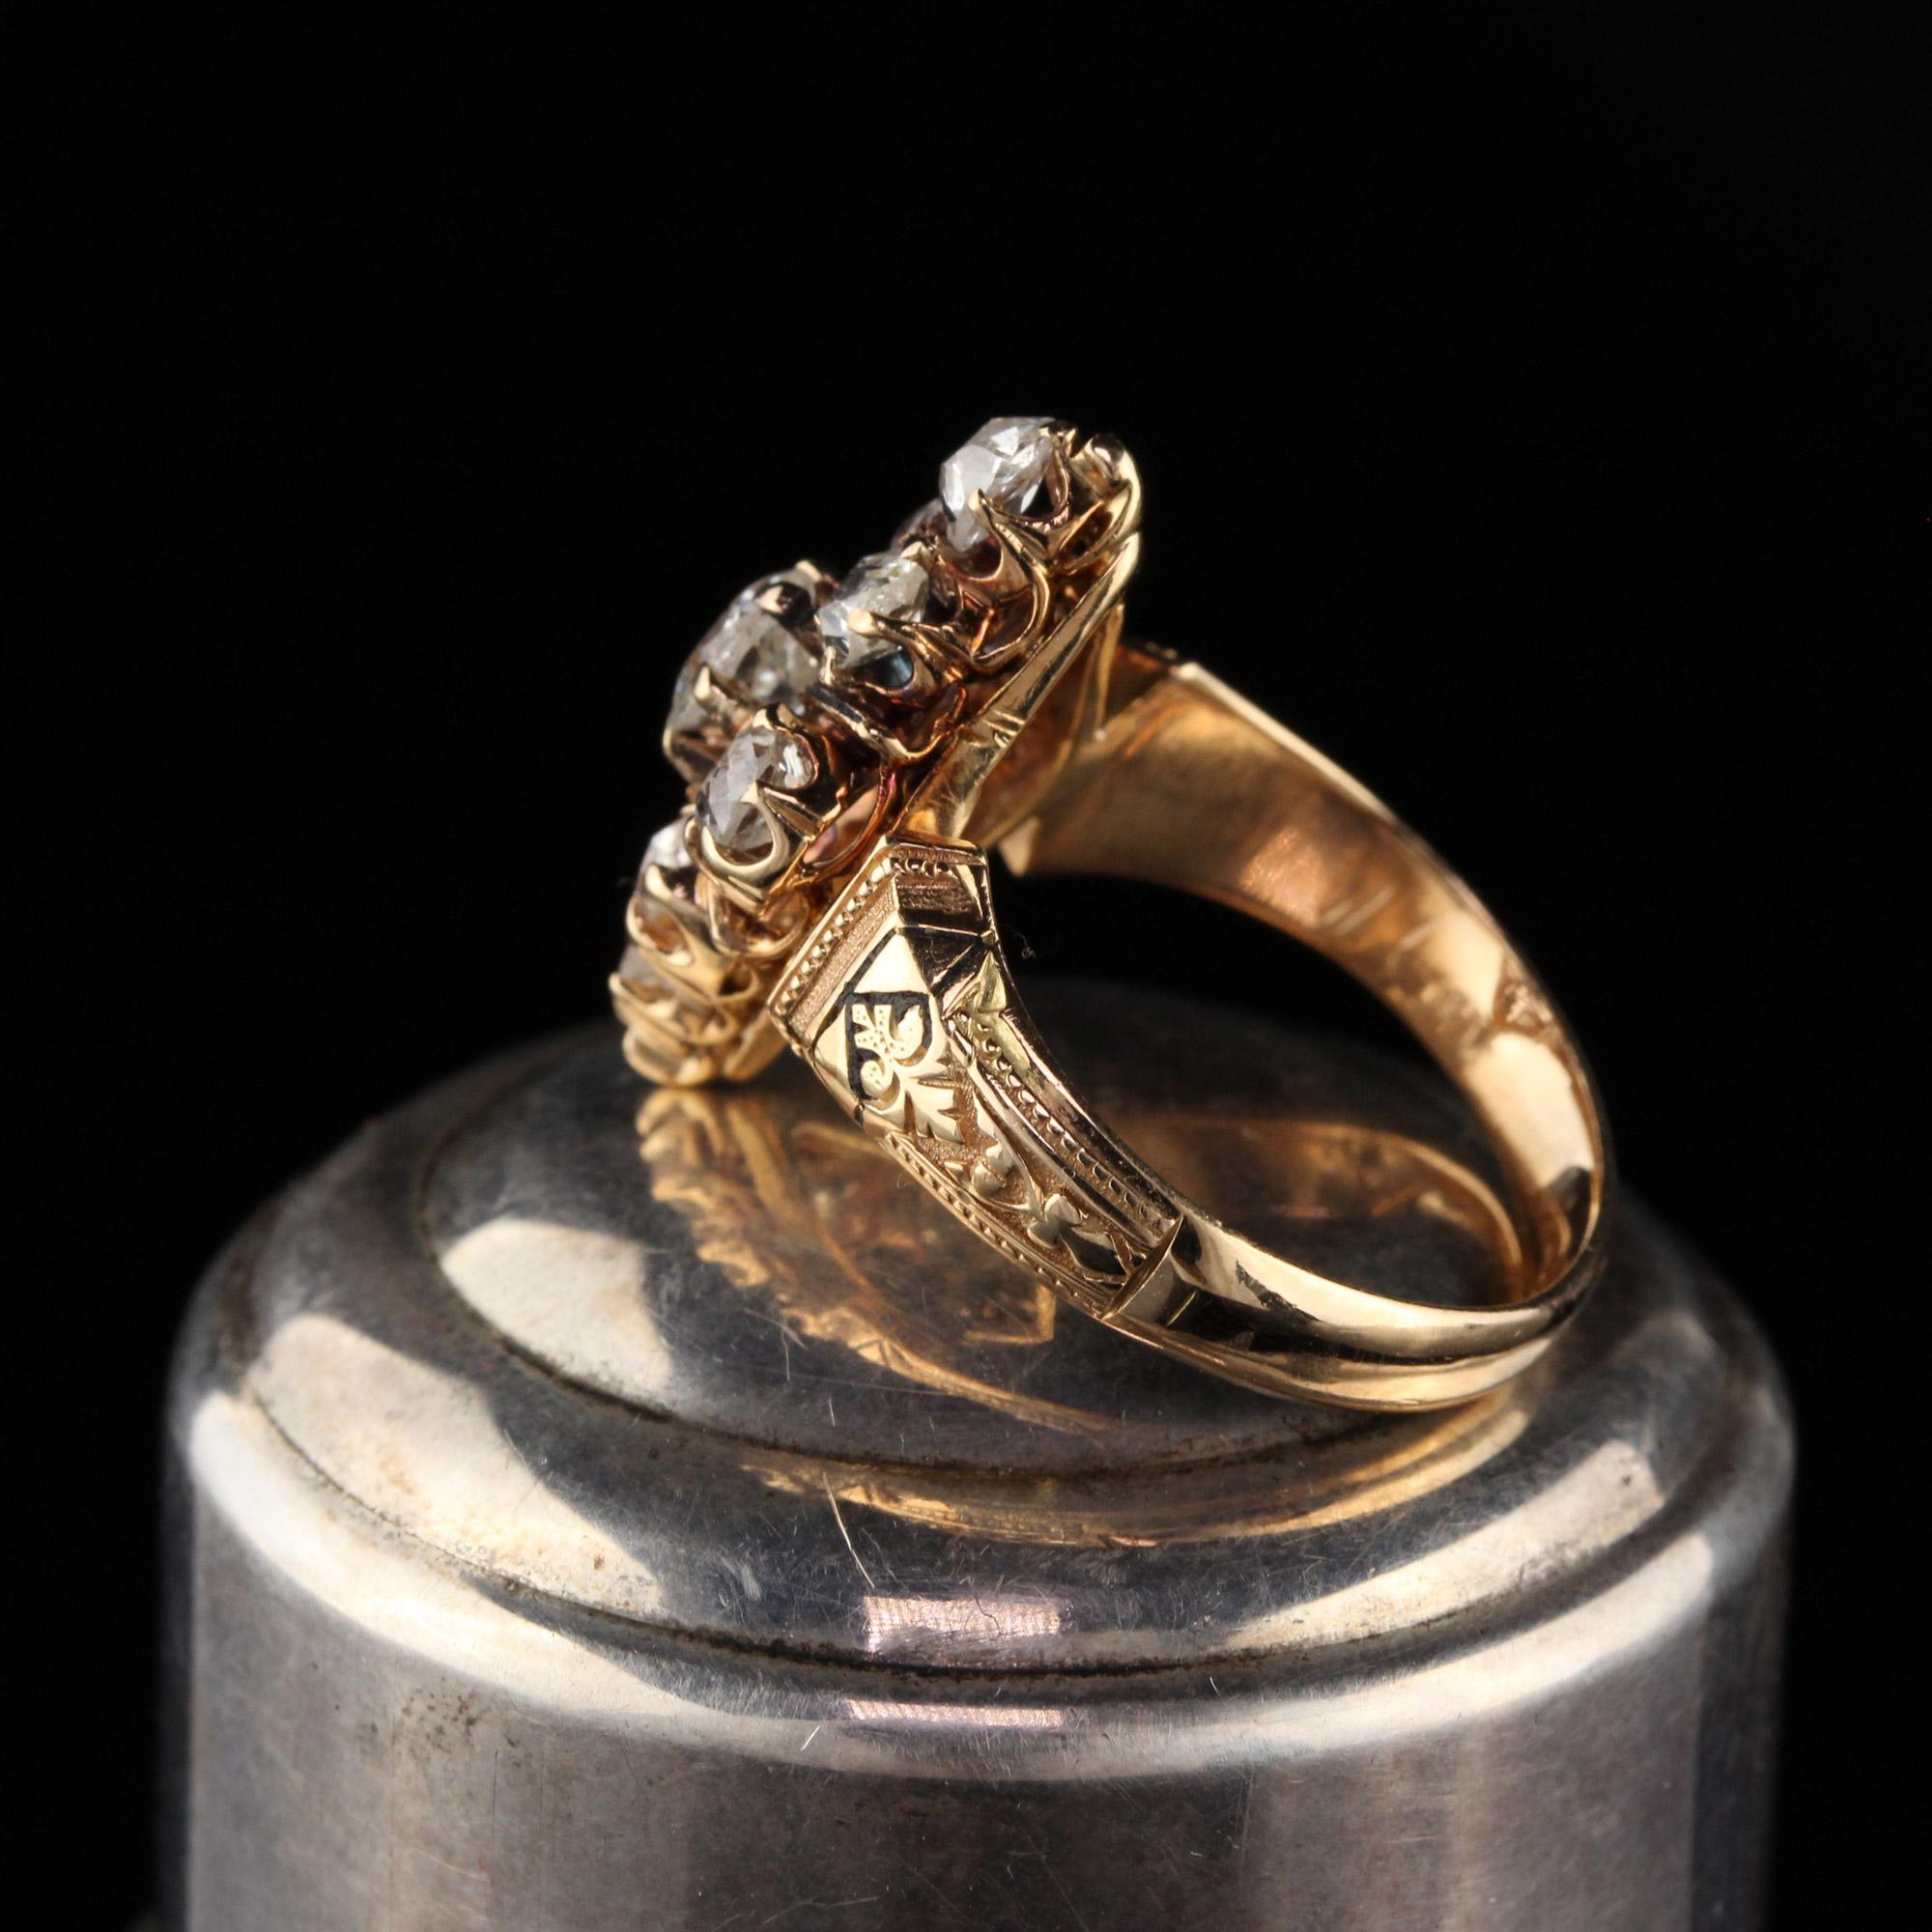 Gorgeous Victorian shield ring with 9 old mine cut diamonds. 

Item #R0562

Metal: 18K Yellow Gold

Weight: 5.7 Grams

Total Diamond Weight: Approximately 1.50 cts

Diamond Color: I

Diamond Clarity: SI1

Ring Size: 6.25 

This ring can be sized for